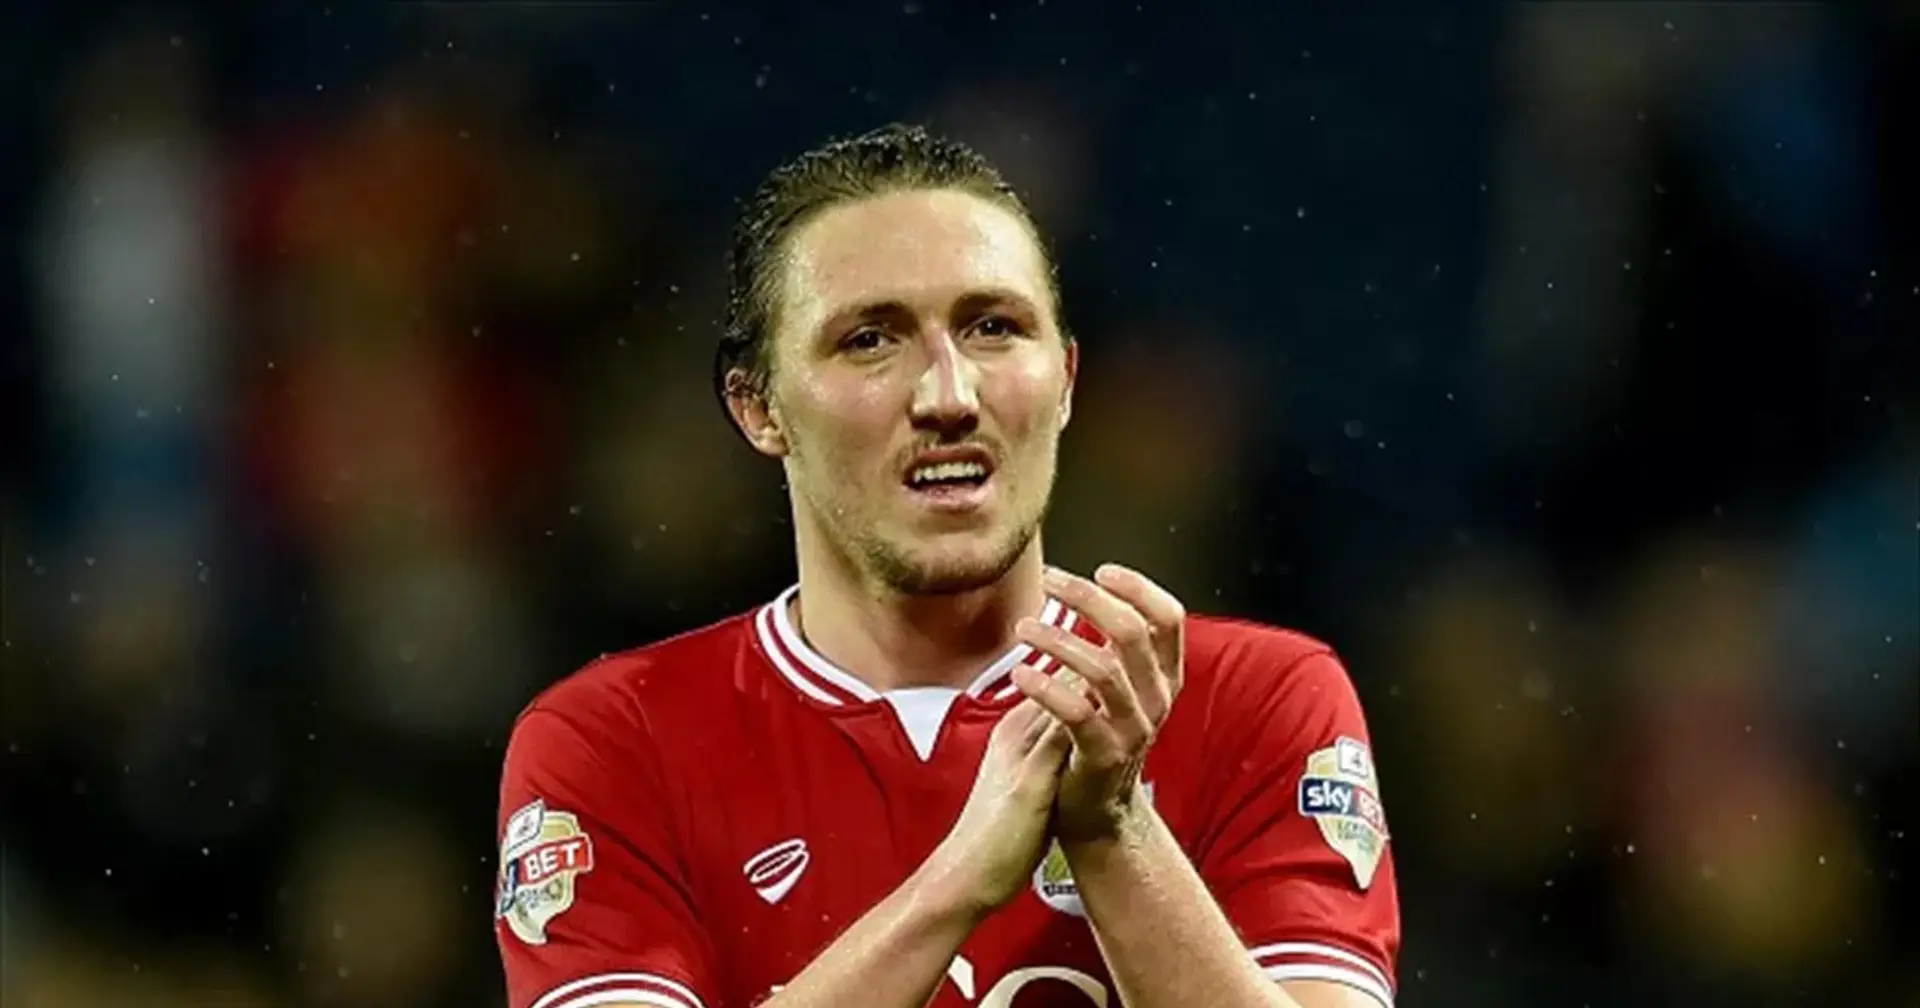 Leeds defender Luke Ayling: 'It's like a full circle for me. I was at Arsenal for 10 years'